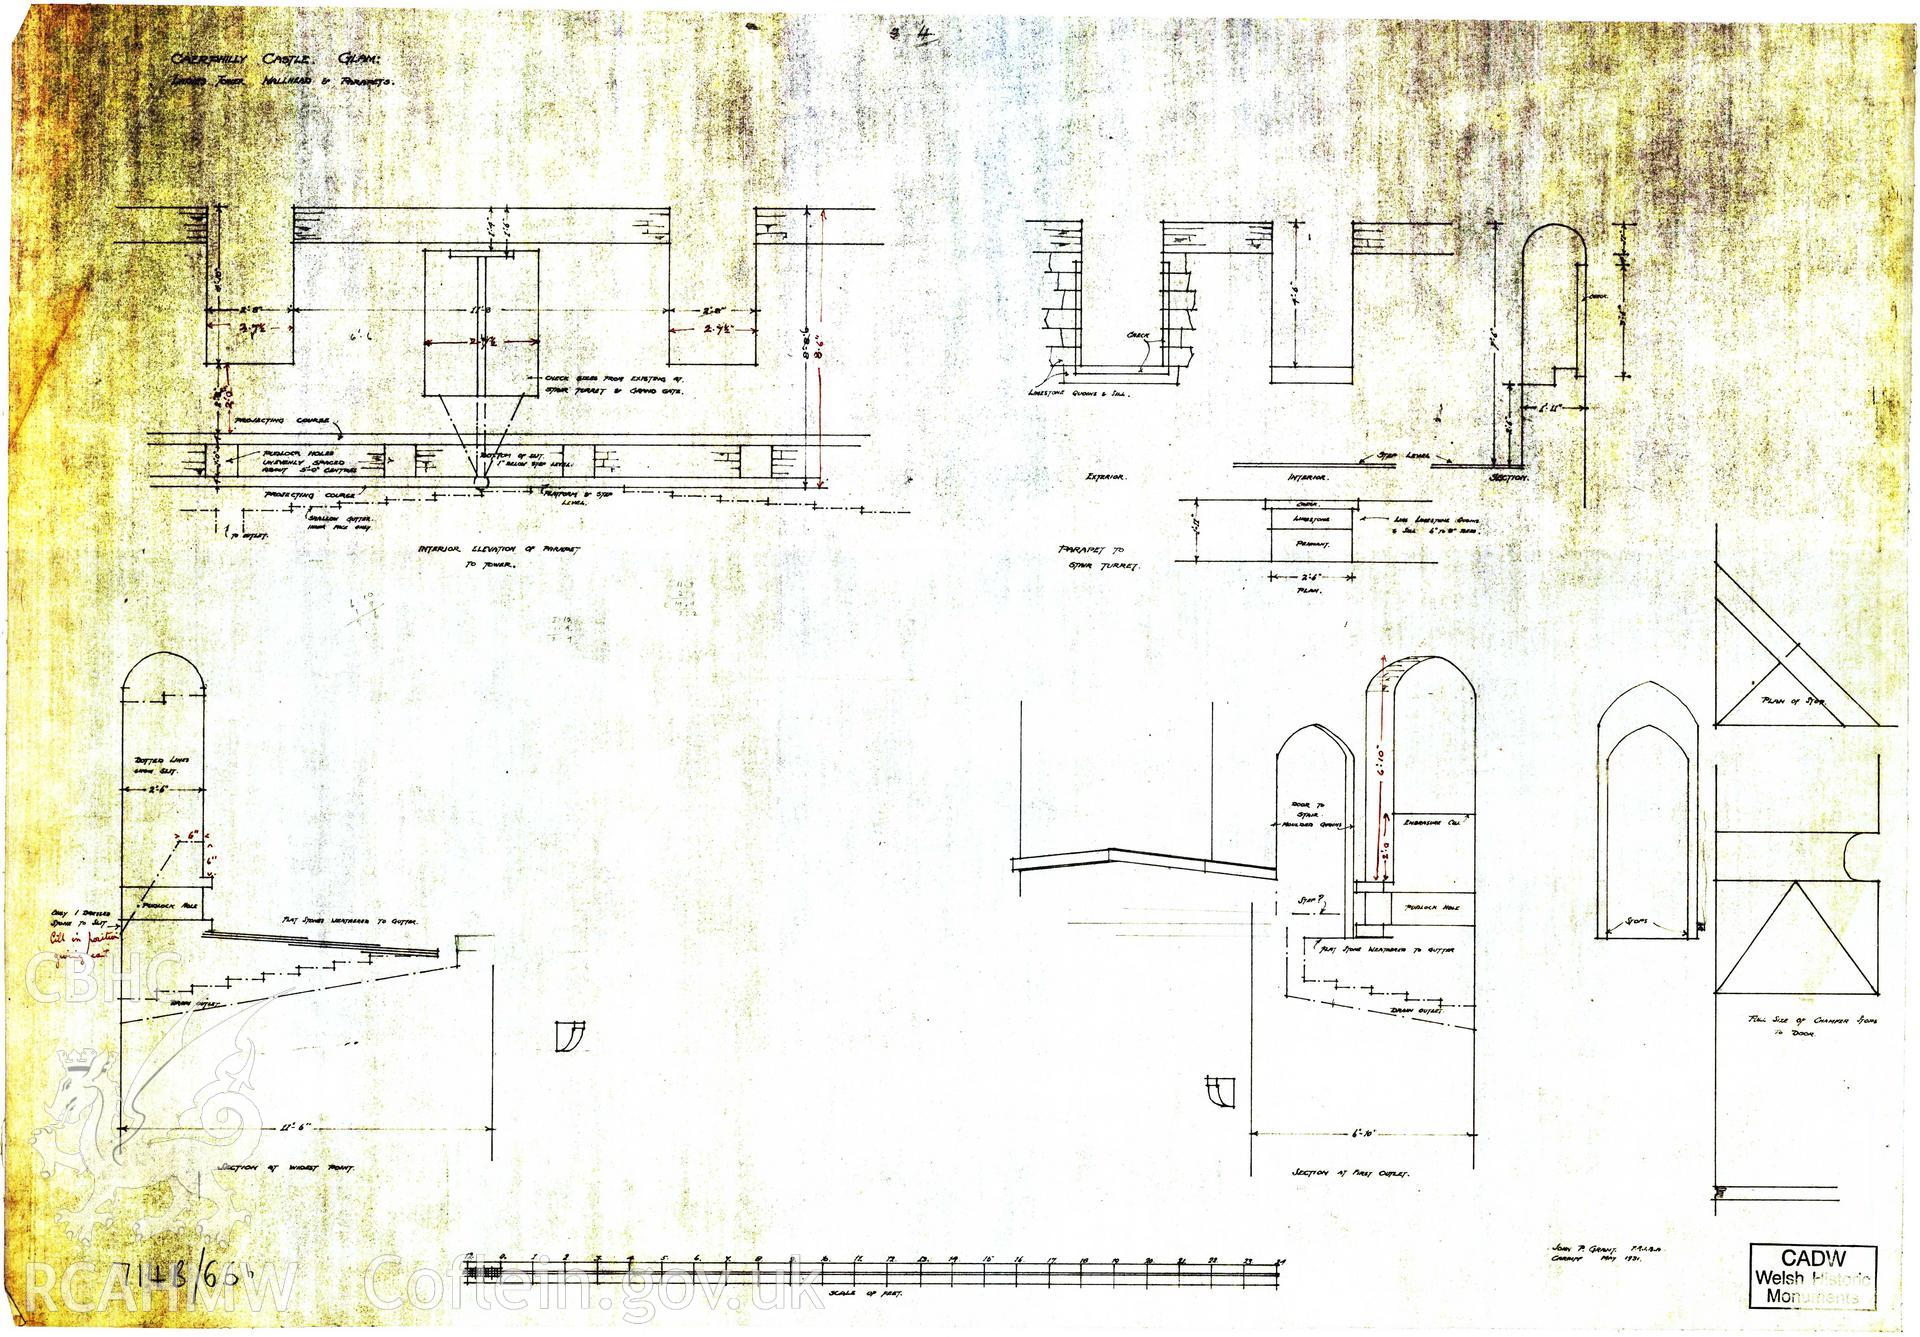 Digital copy of Cadw guardianship monument drawing of Caerphilly Castle. NW tower, wall-head + parapet. Cadw ref. no: 714B/66b. Scale 1:24. Original drawing withdrawn and returned to Cadw at their request.